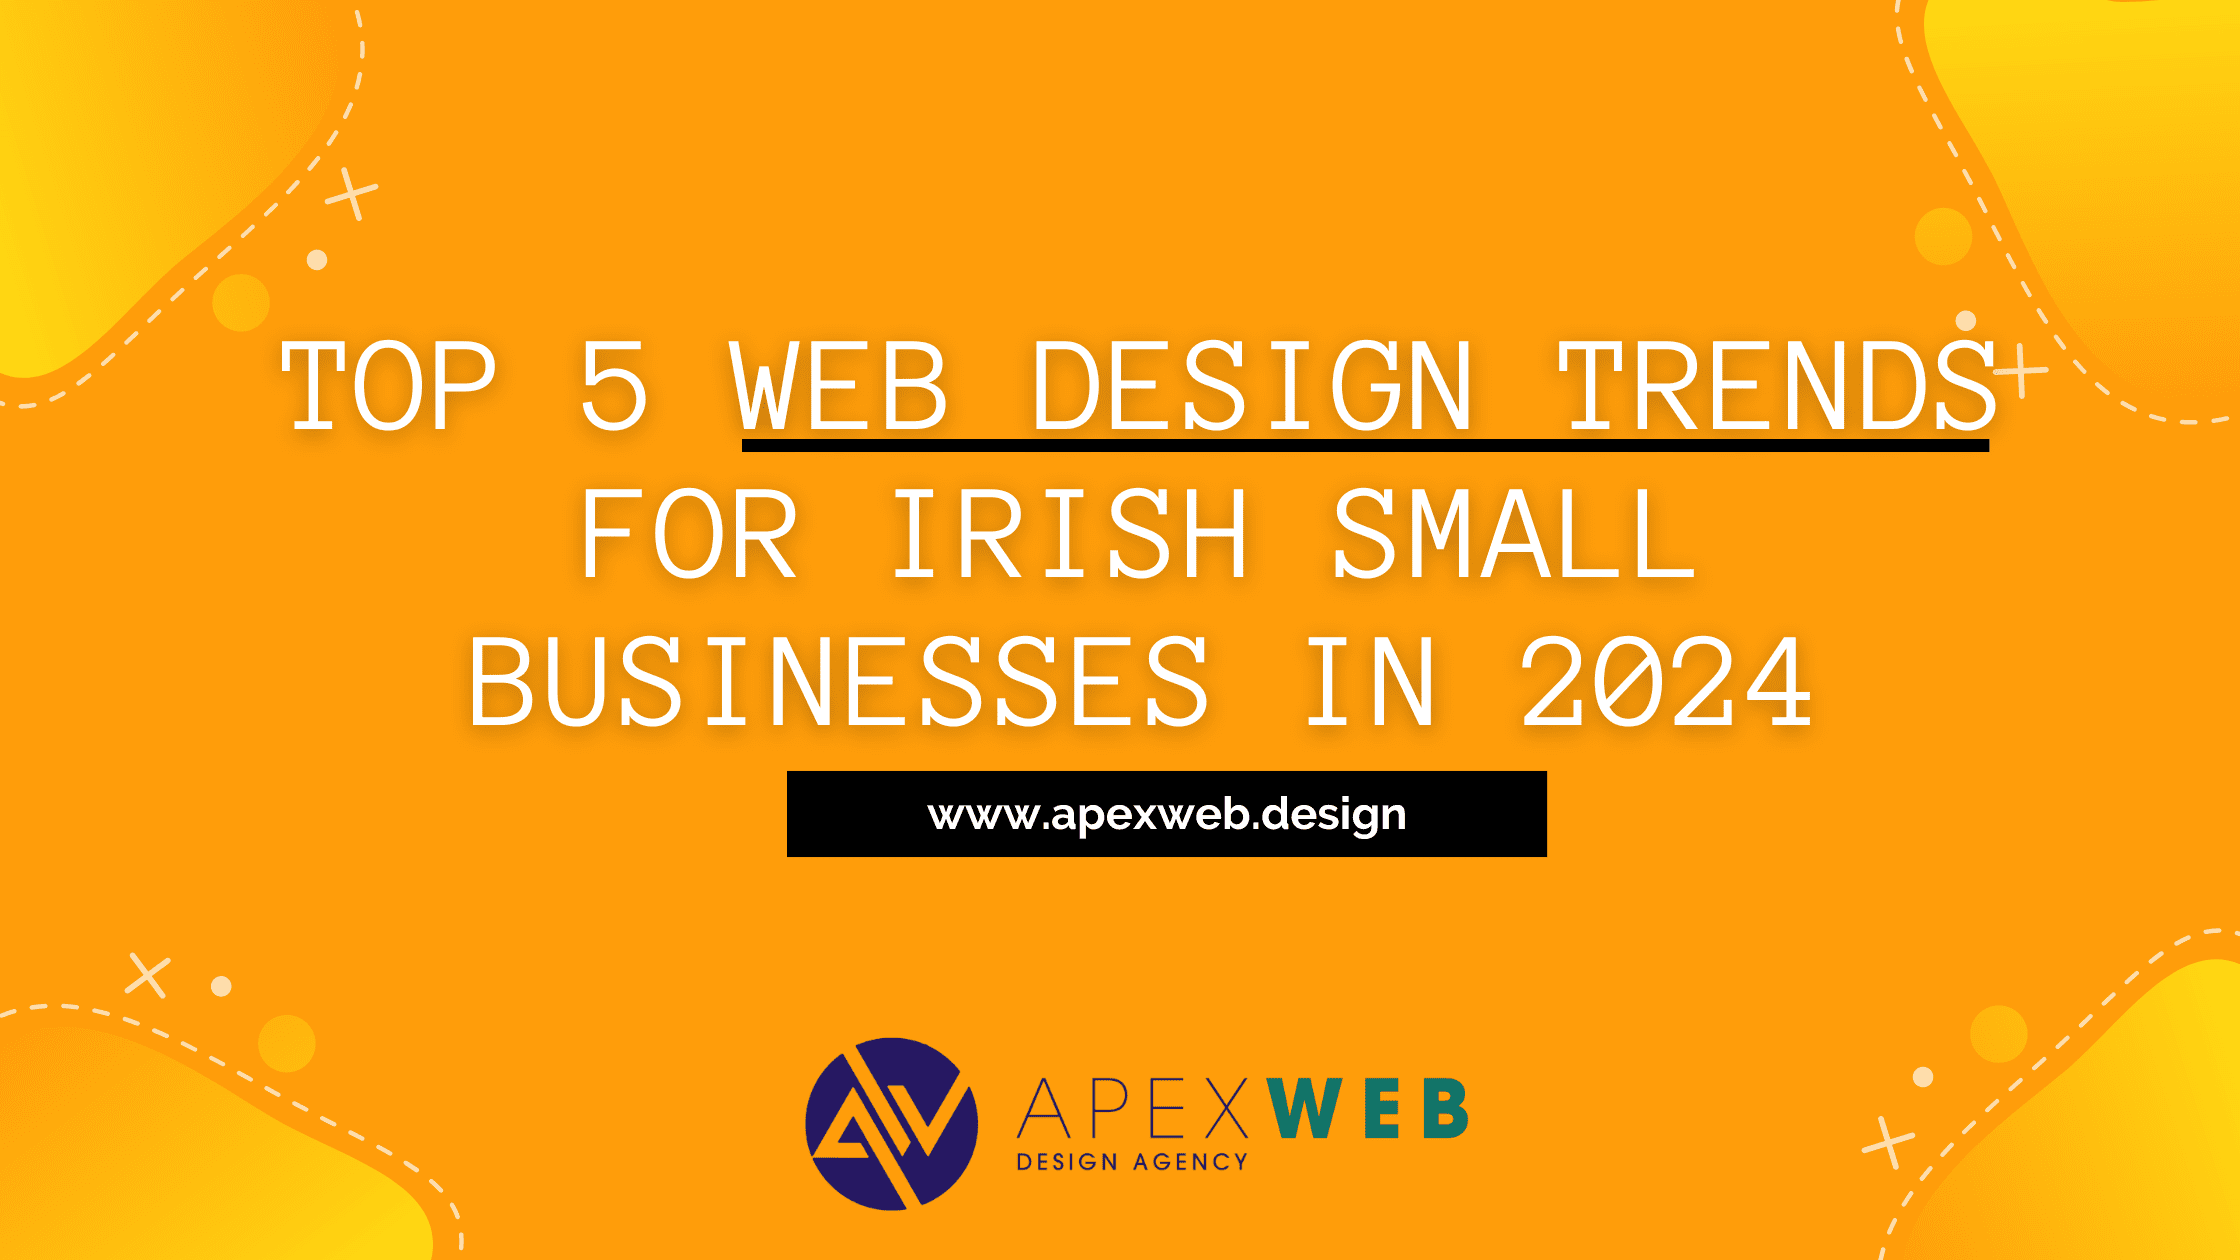 Top 5 Web Design Trends for Irish Small Businesses in 2024